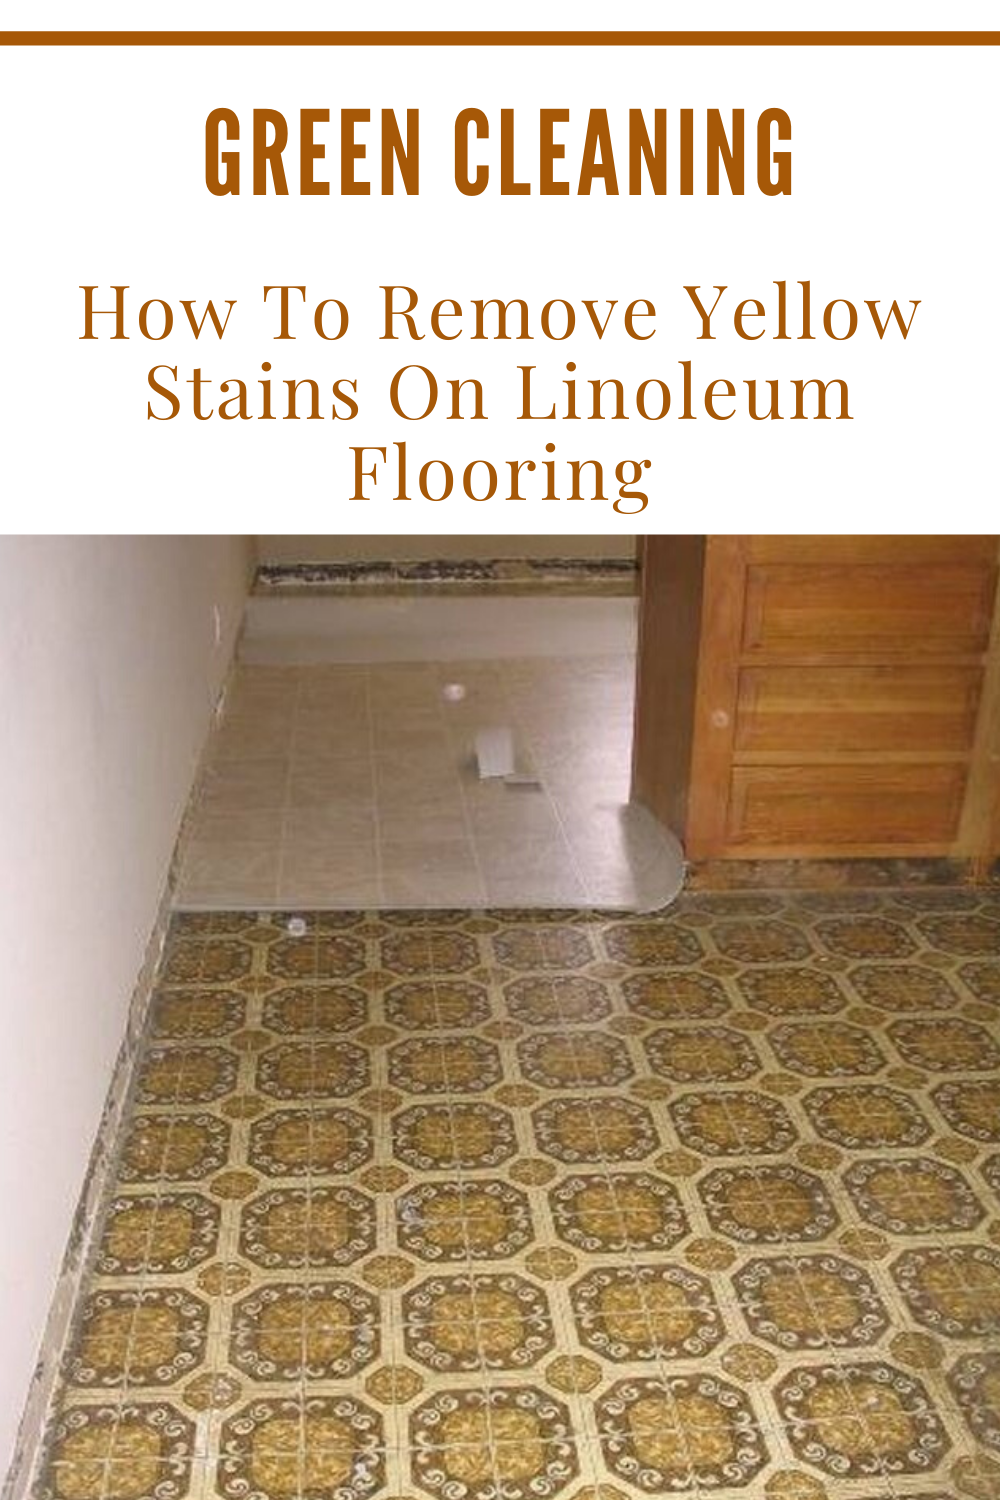 Green Cleaning: How To Remove Yellow Stains On Linoleum Flooring